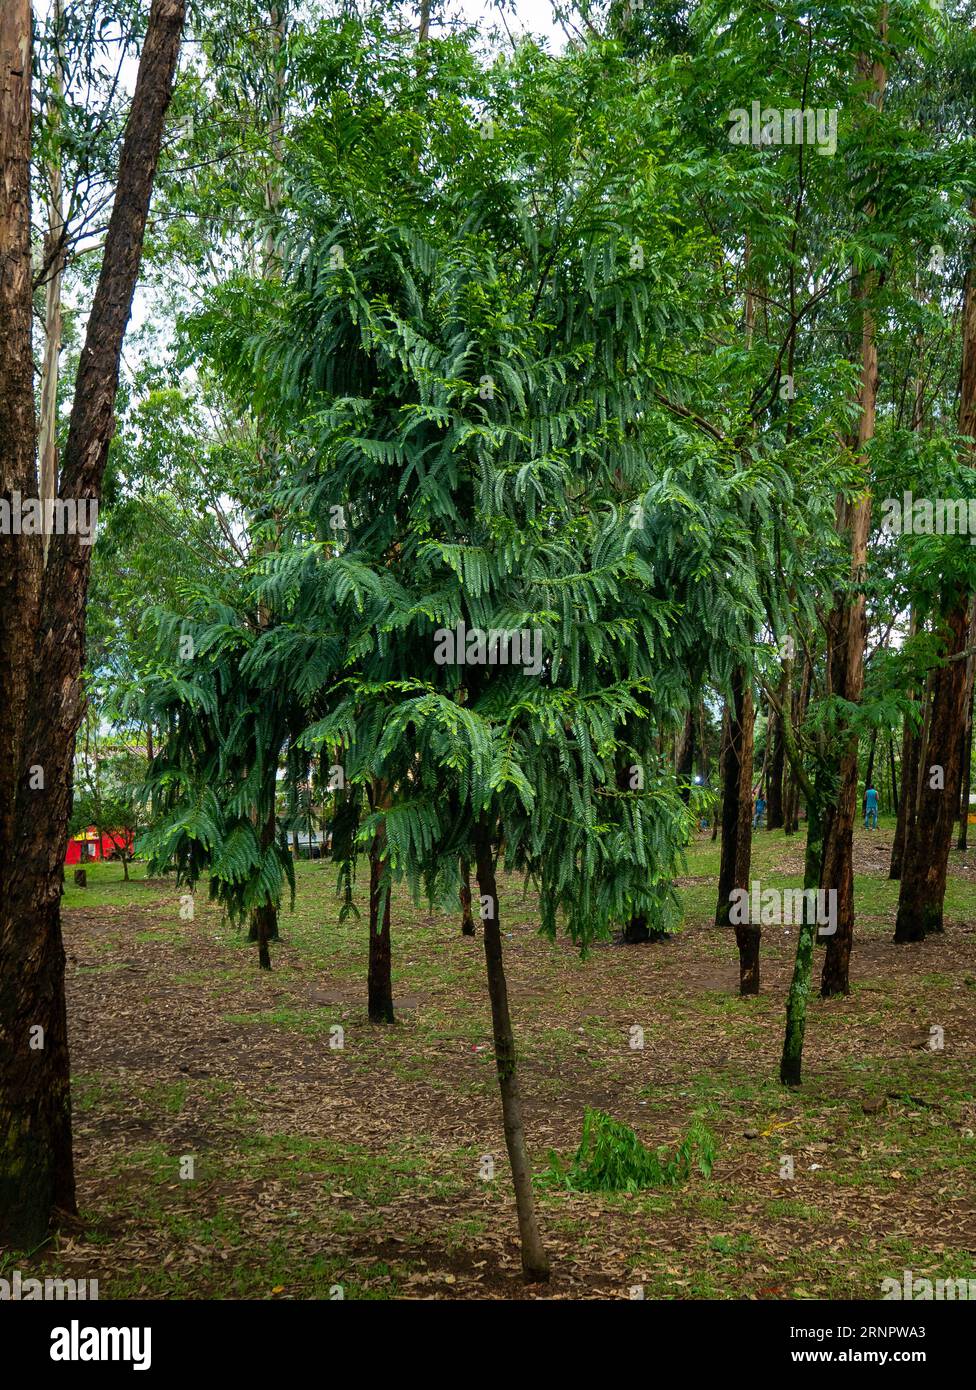 A Tree Known as Conifer (Retrophyllum rospigliosii) in a Forest Stock Photo